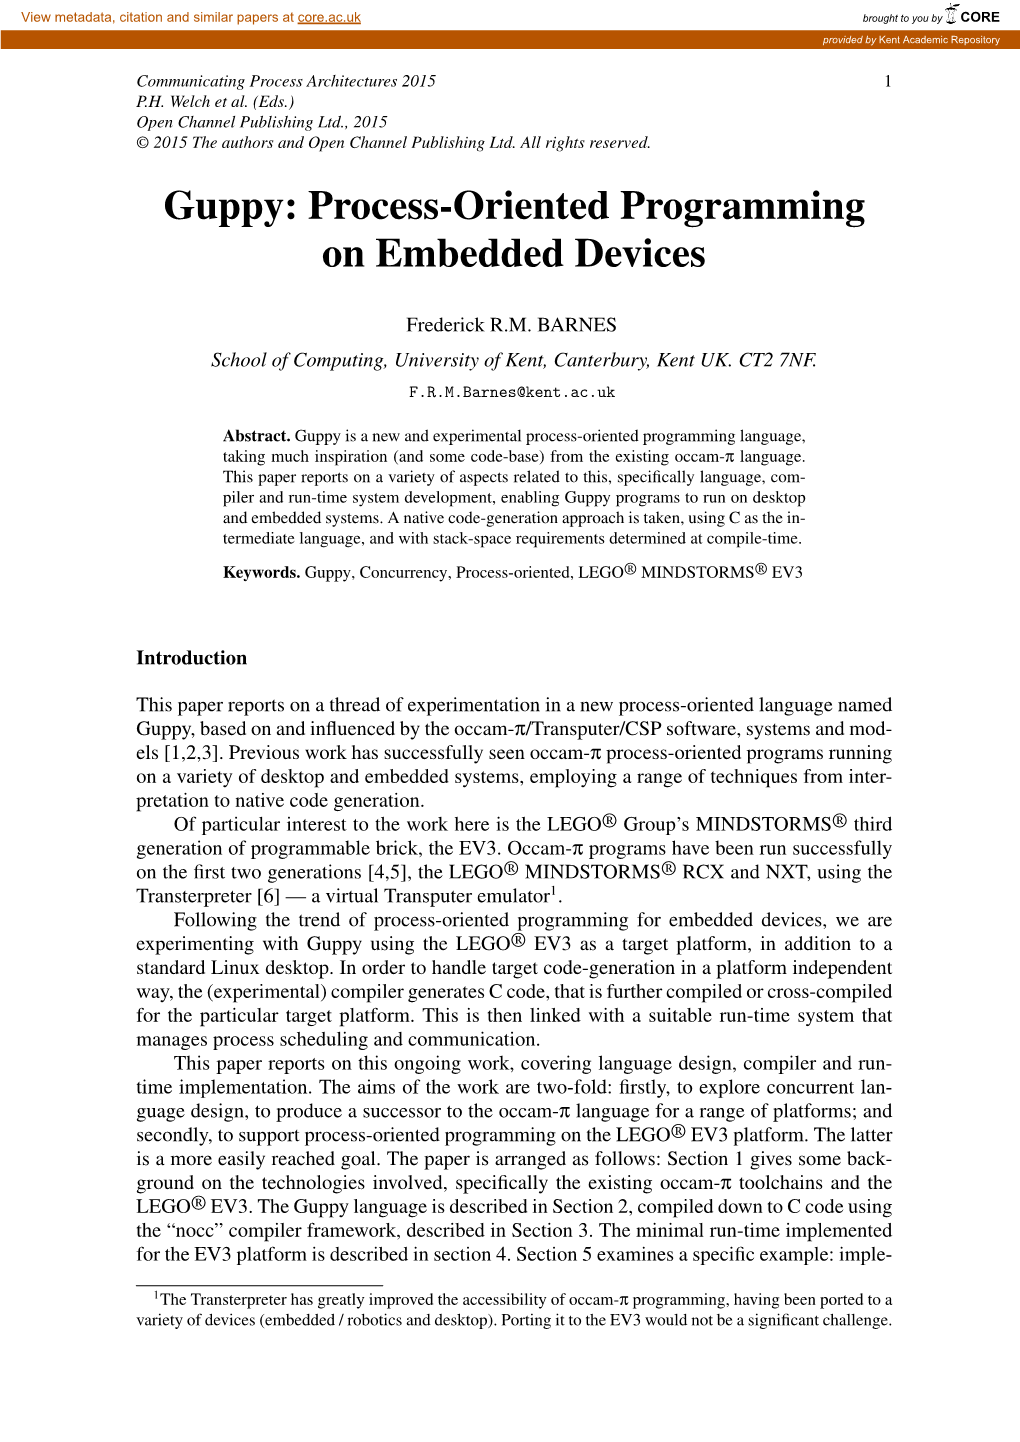 Guppy: Process-Oriented Programming on Embedded Devices